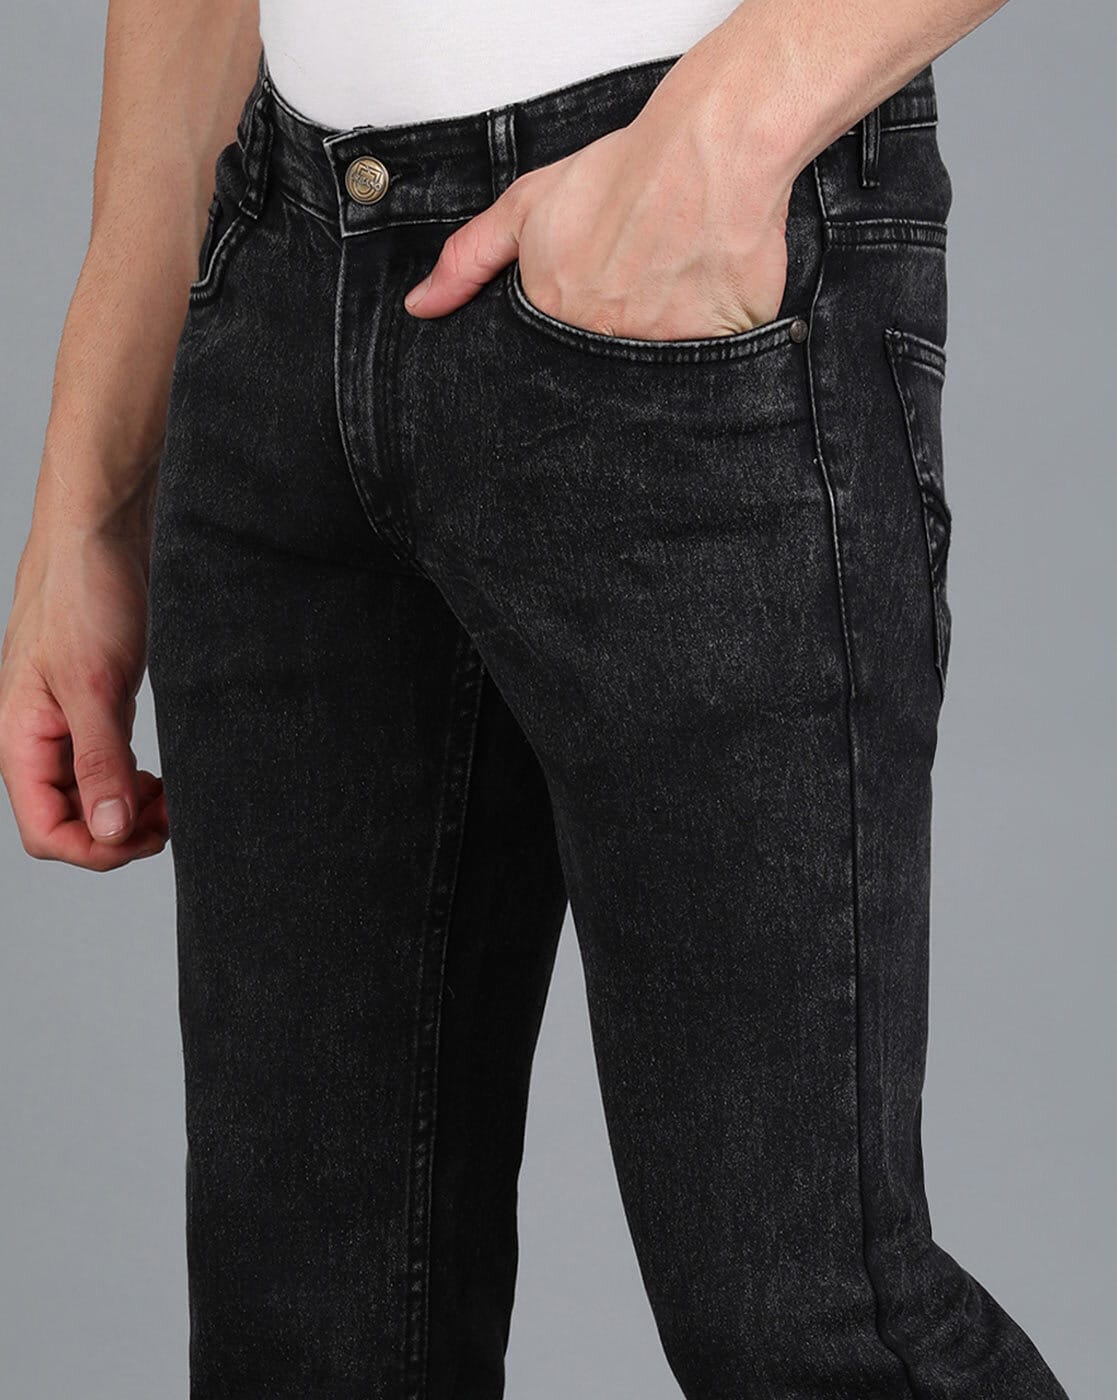 Buy Black Jeans for Men by URBANO FASHION Online